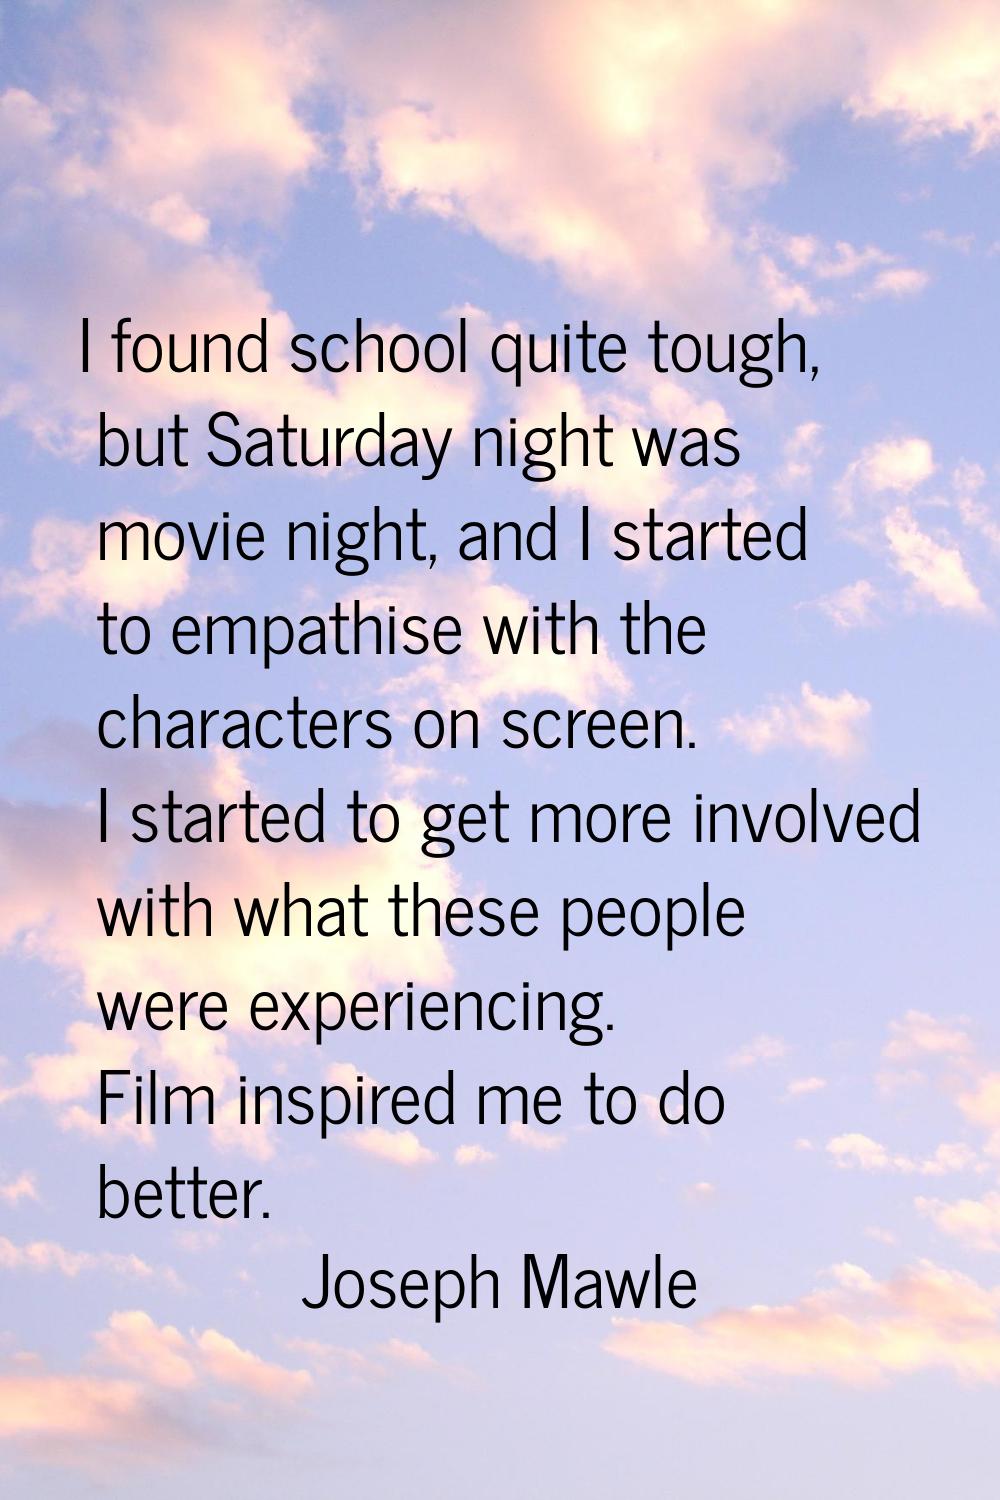 I found school quite tough, but Saturday night was movie night, and I started to empathise with the